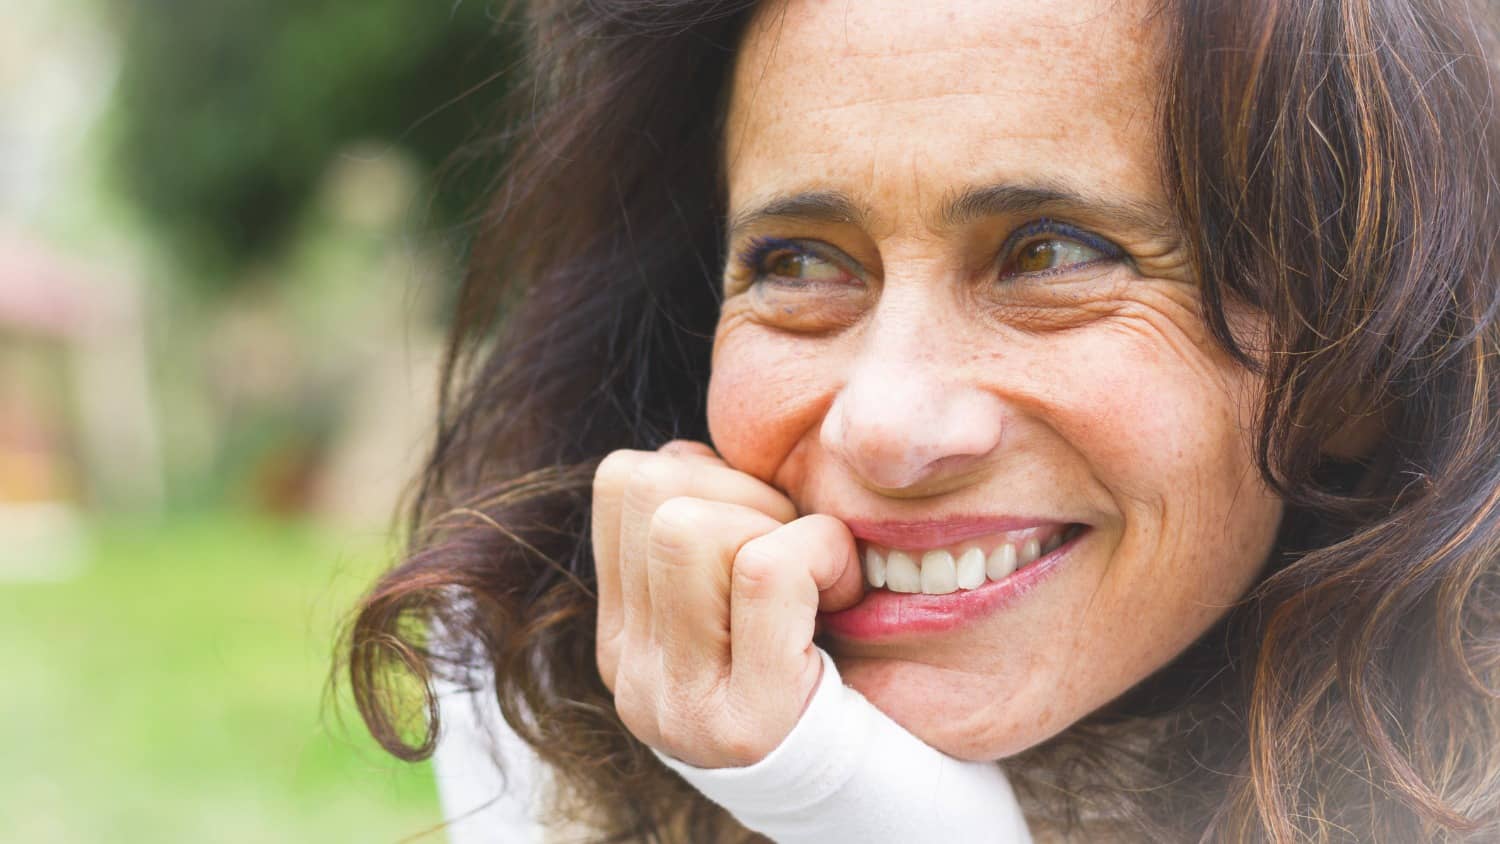 https://cdn.sixtyandme.com/wp-content/uploads/2019/09/Sixty-and-Me_16-Truths-About-Reaching-60-%E2%80%93-the-Universal-and-the-Personal.jpg